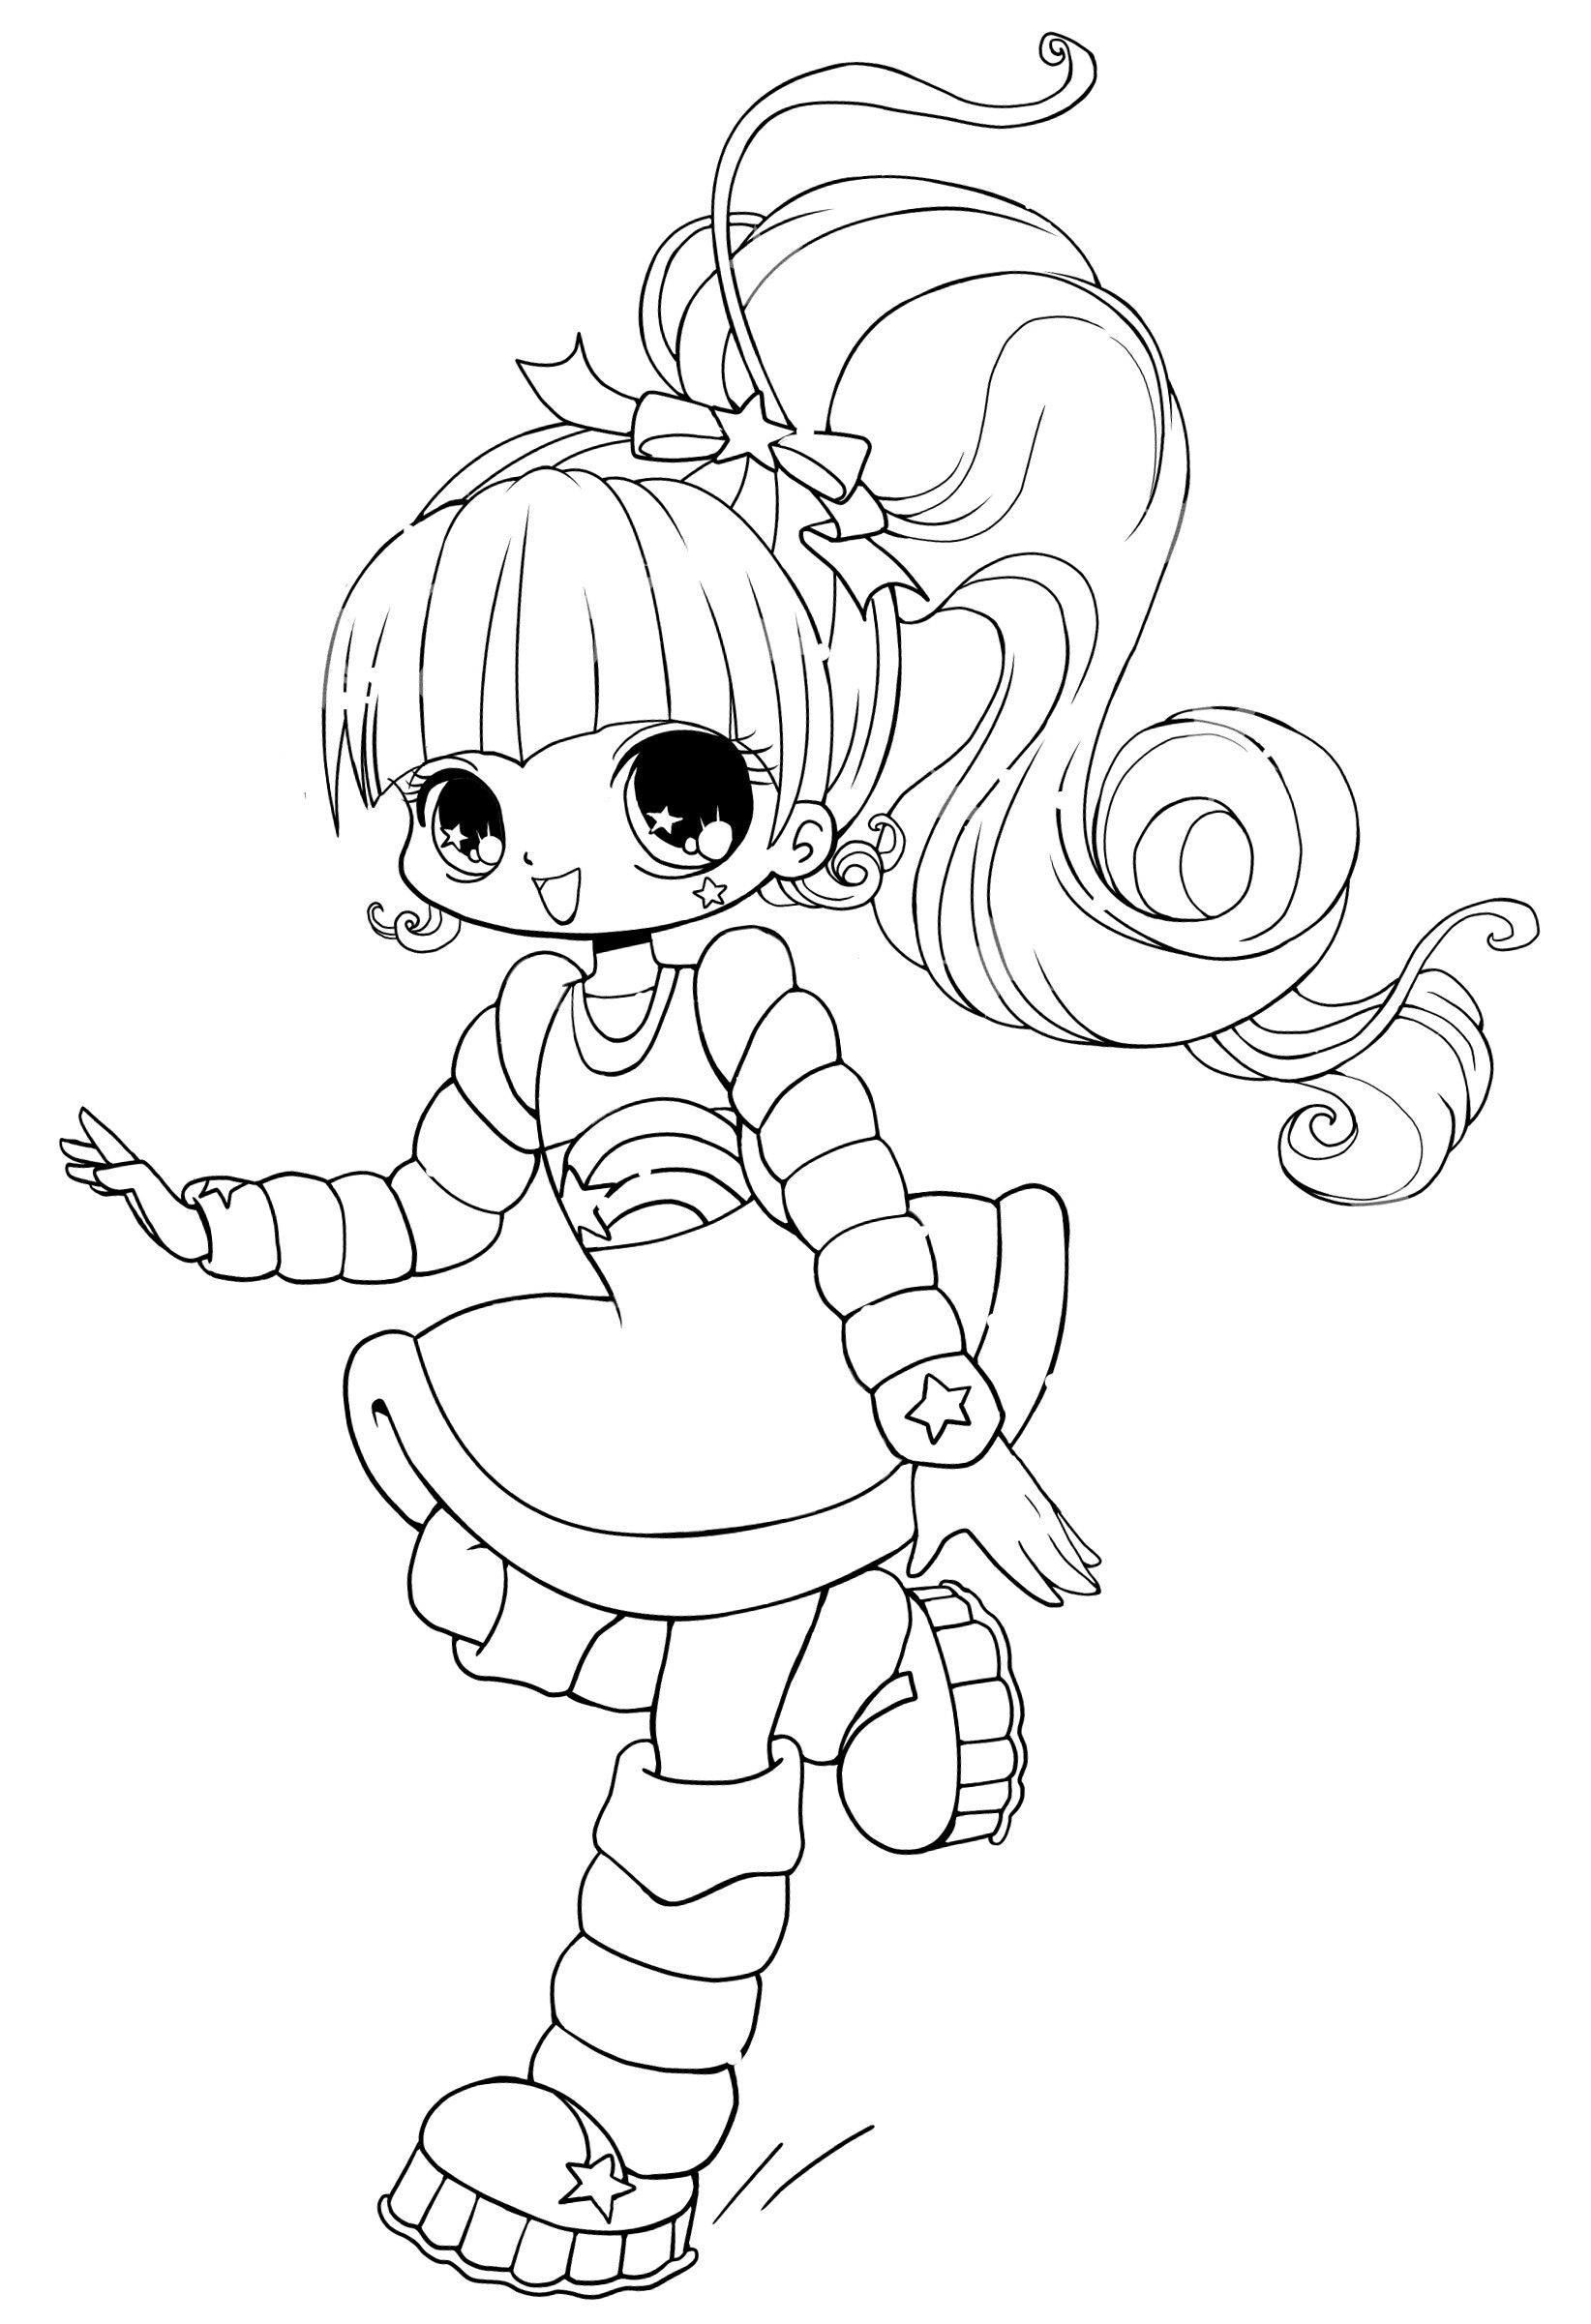 Cute Free Coloring Pages
 Free Printable Chibi Coloring Pages For Kids